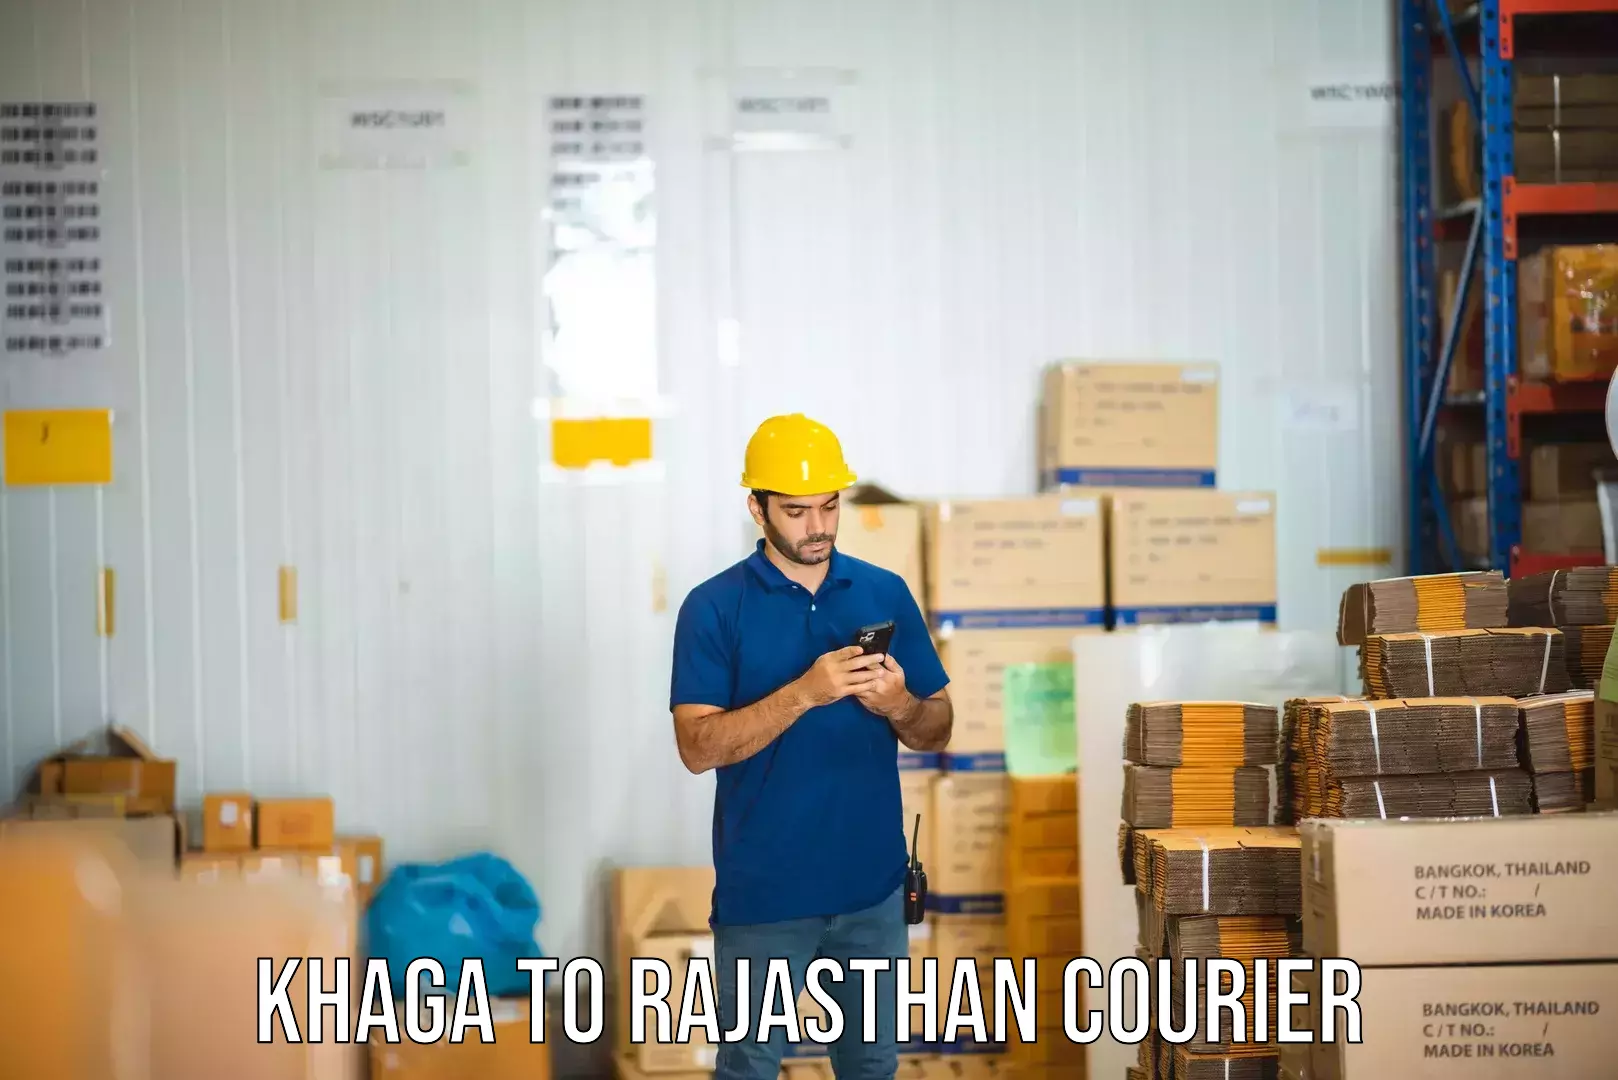 User-friendly delivery service Khaga to Rajasthan